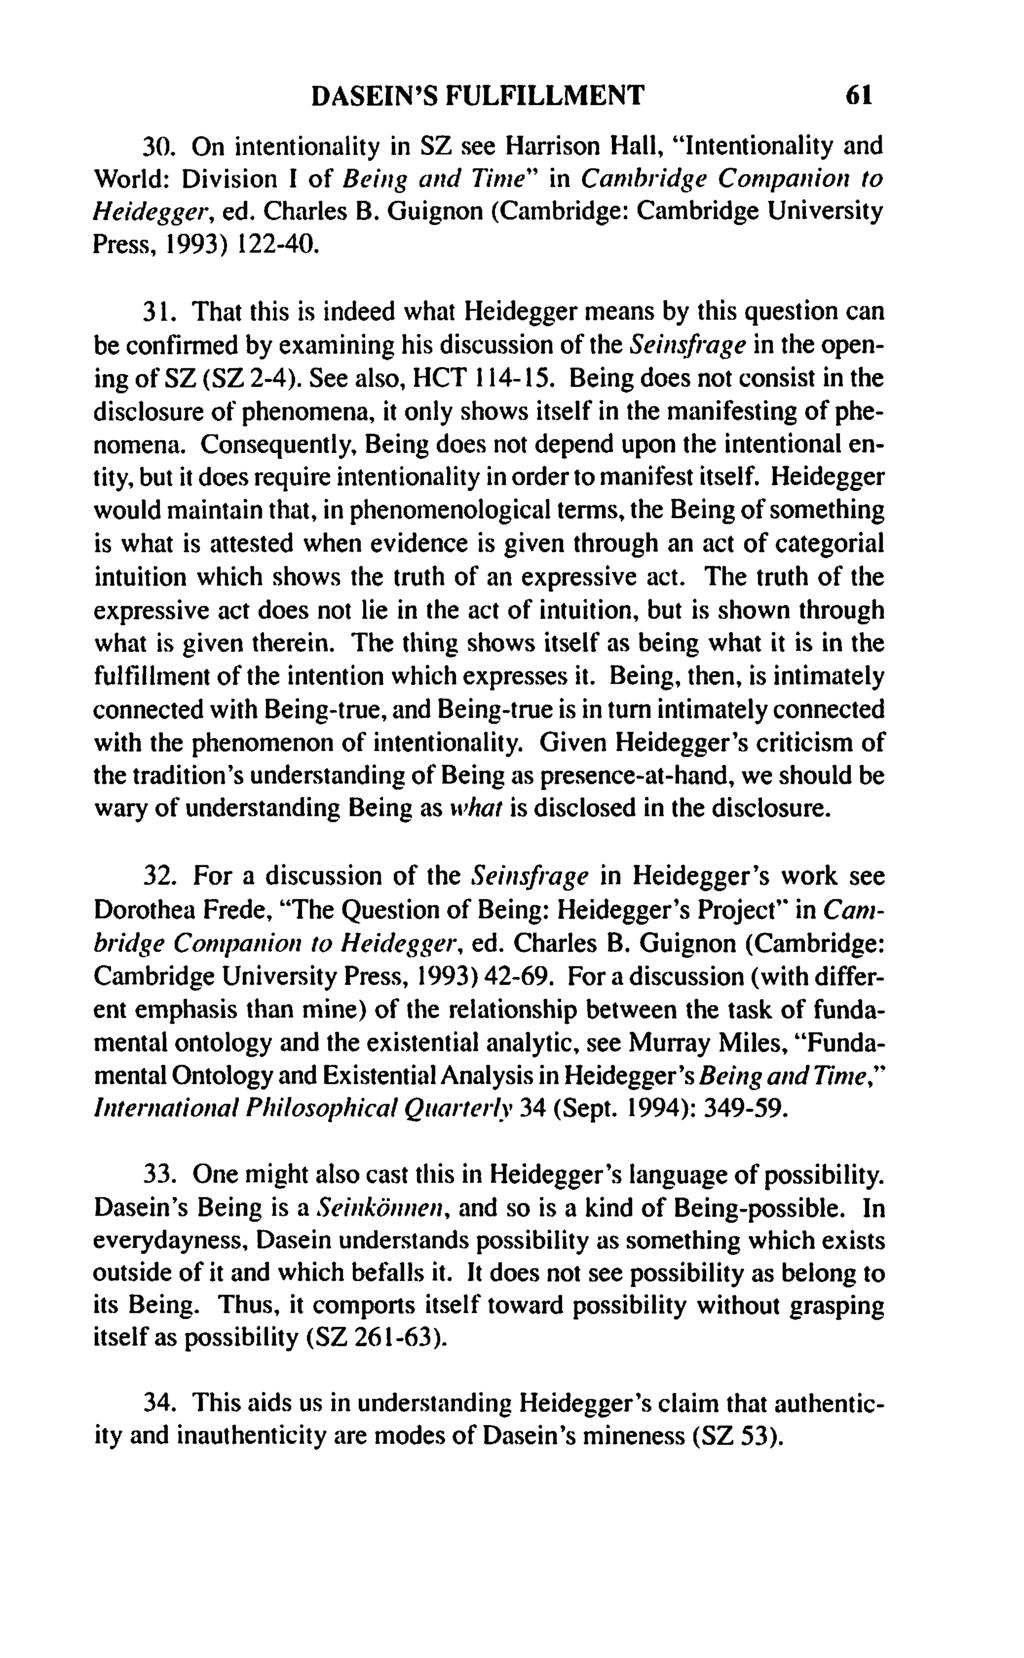 DASEIN'S FULFILLMENT 61 30. On intentionality in SZ see Harrison Hall, "Intentionality and World: Division I of Being and Time" in Cambridge Companion to Heidegger, ed. Charles B.